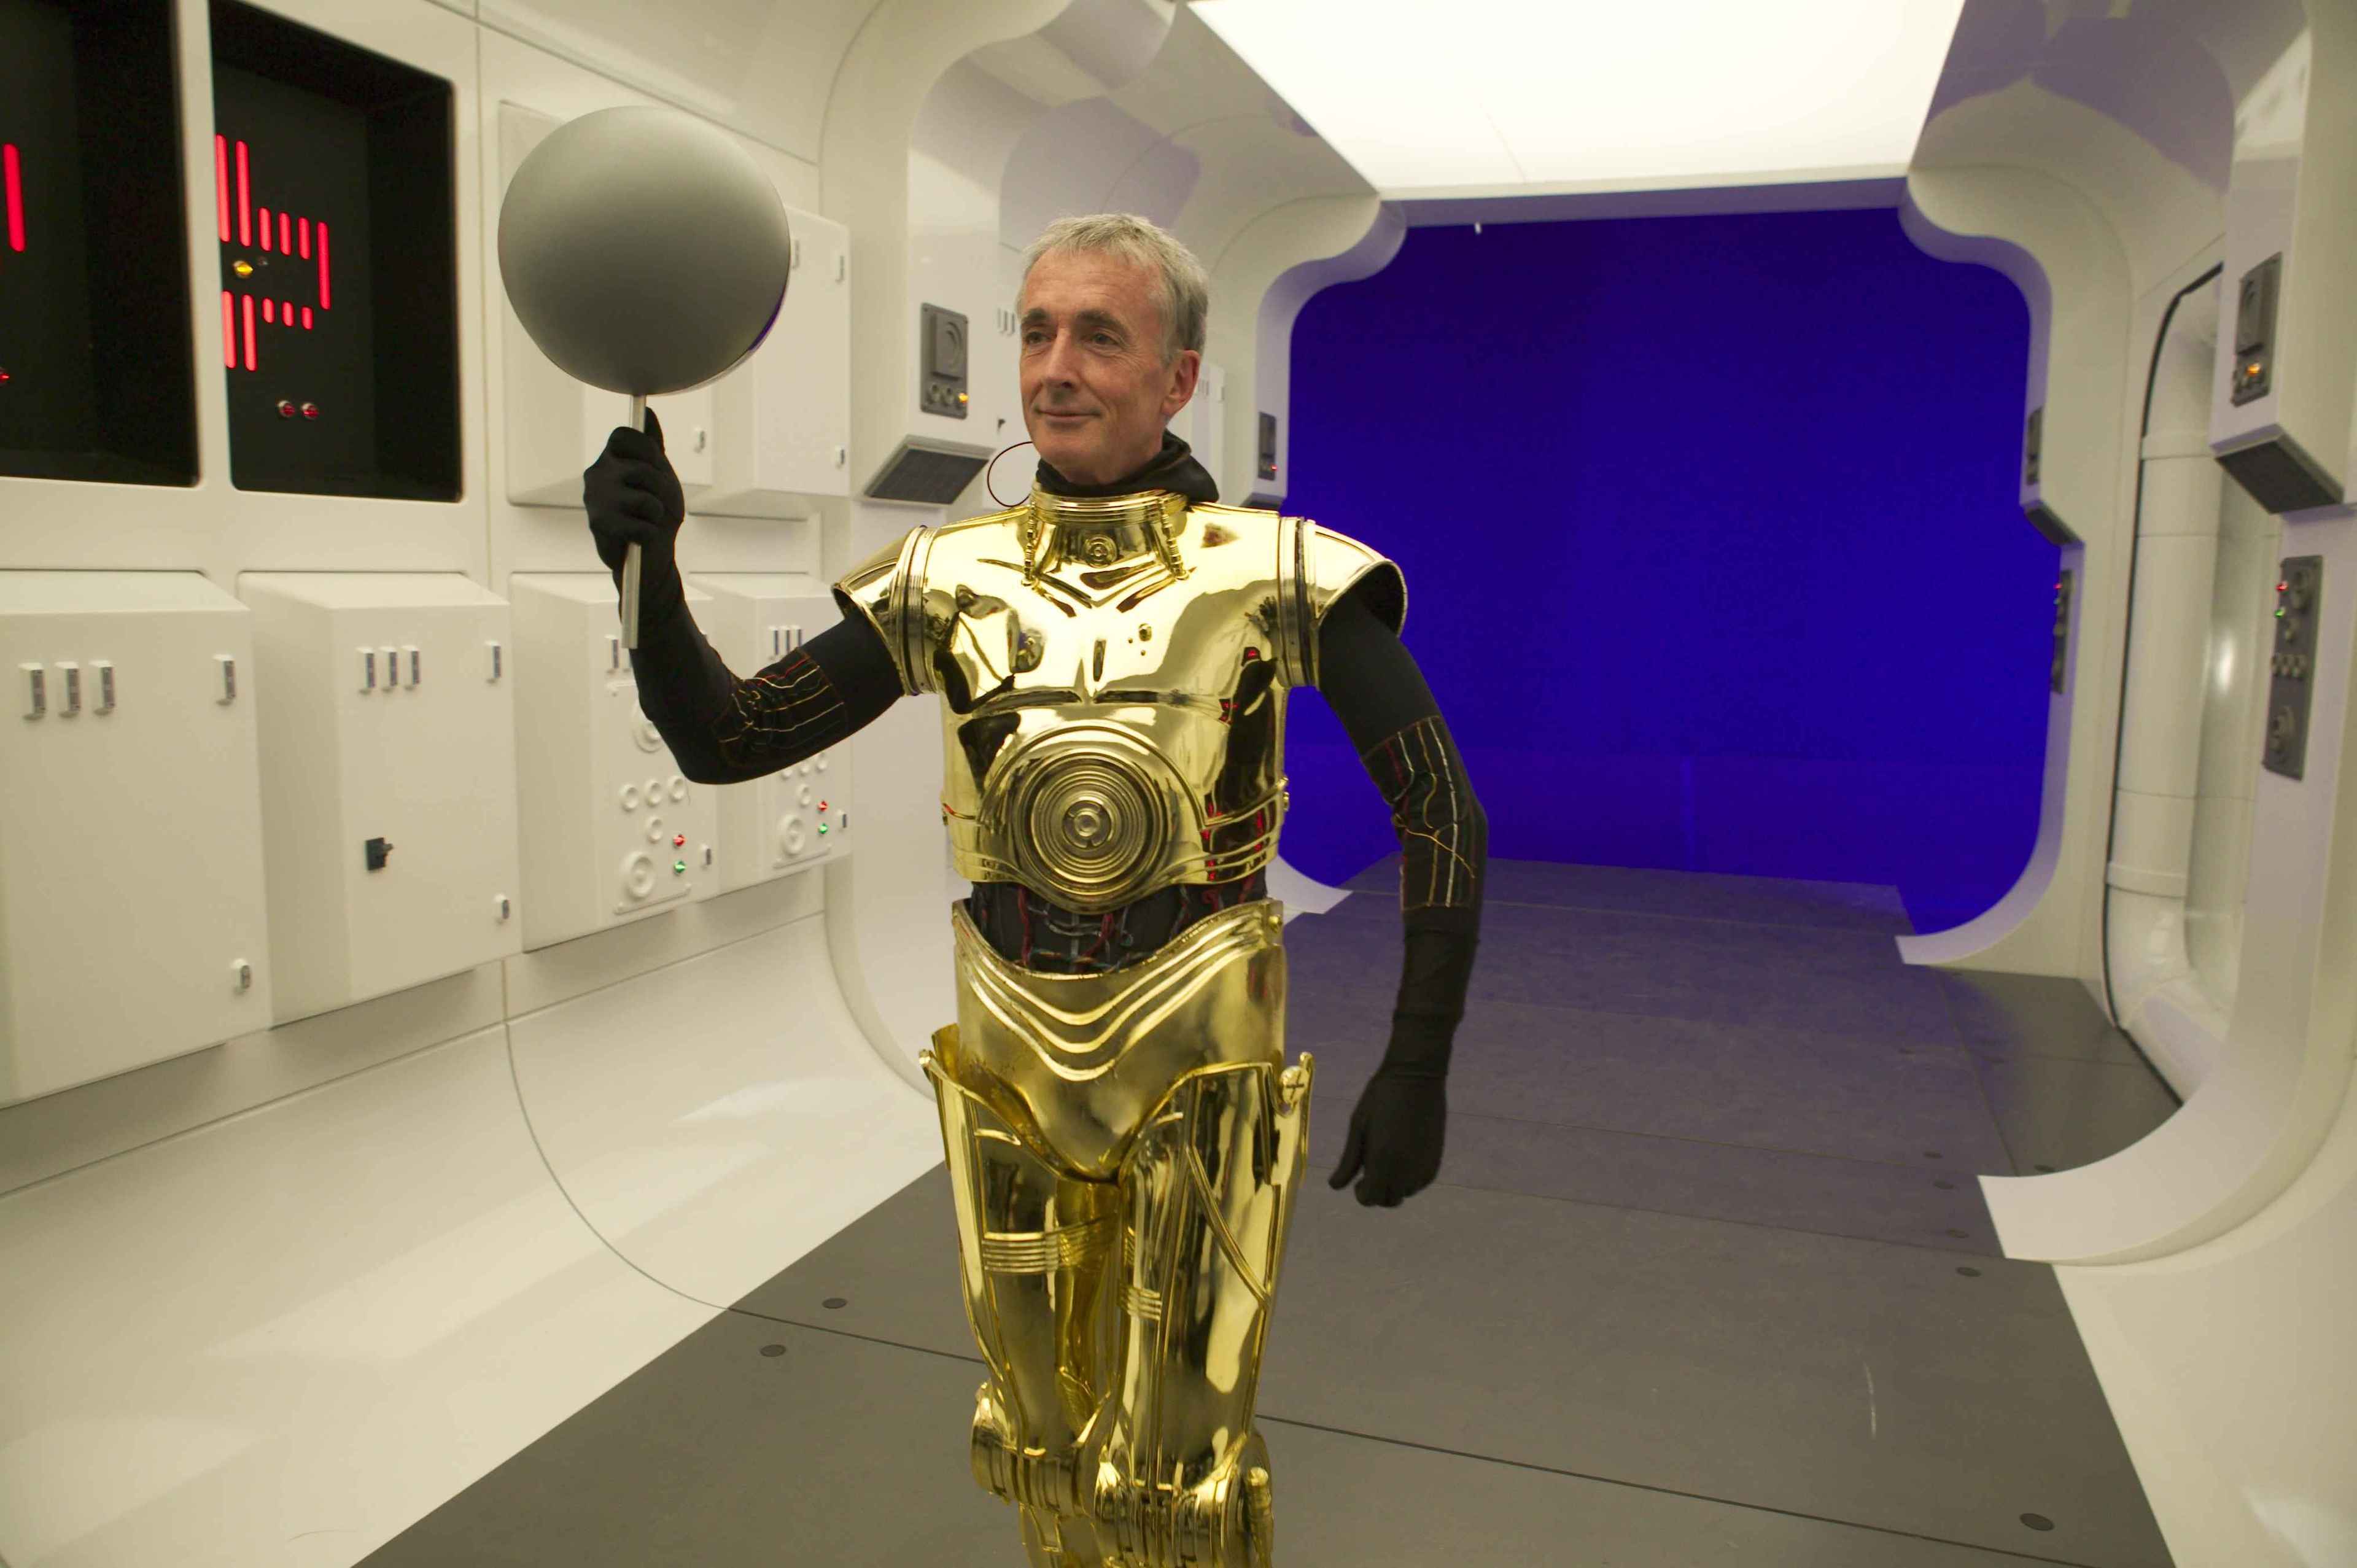 Anthony Daniels in-costume as C-3PO (now with his classic gold coverings).